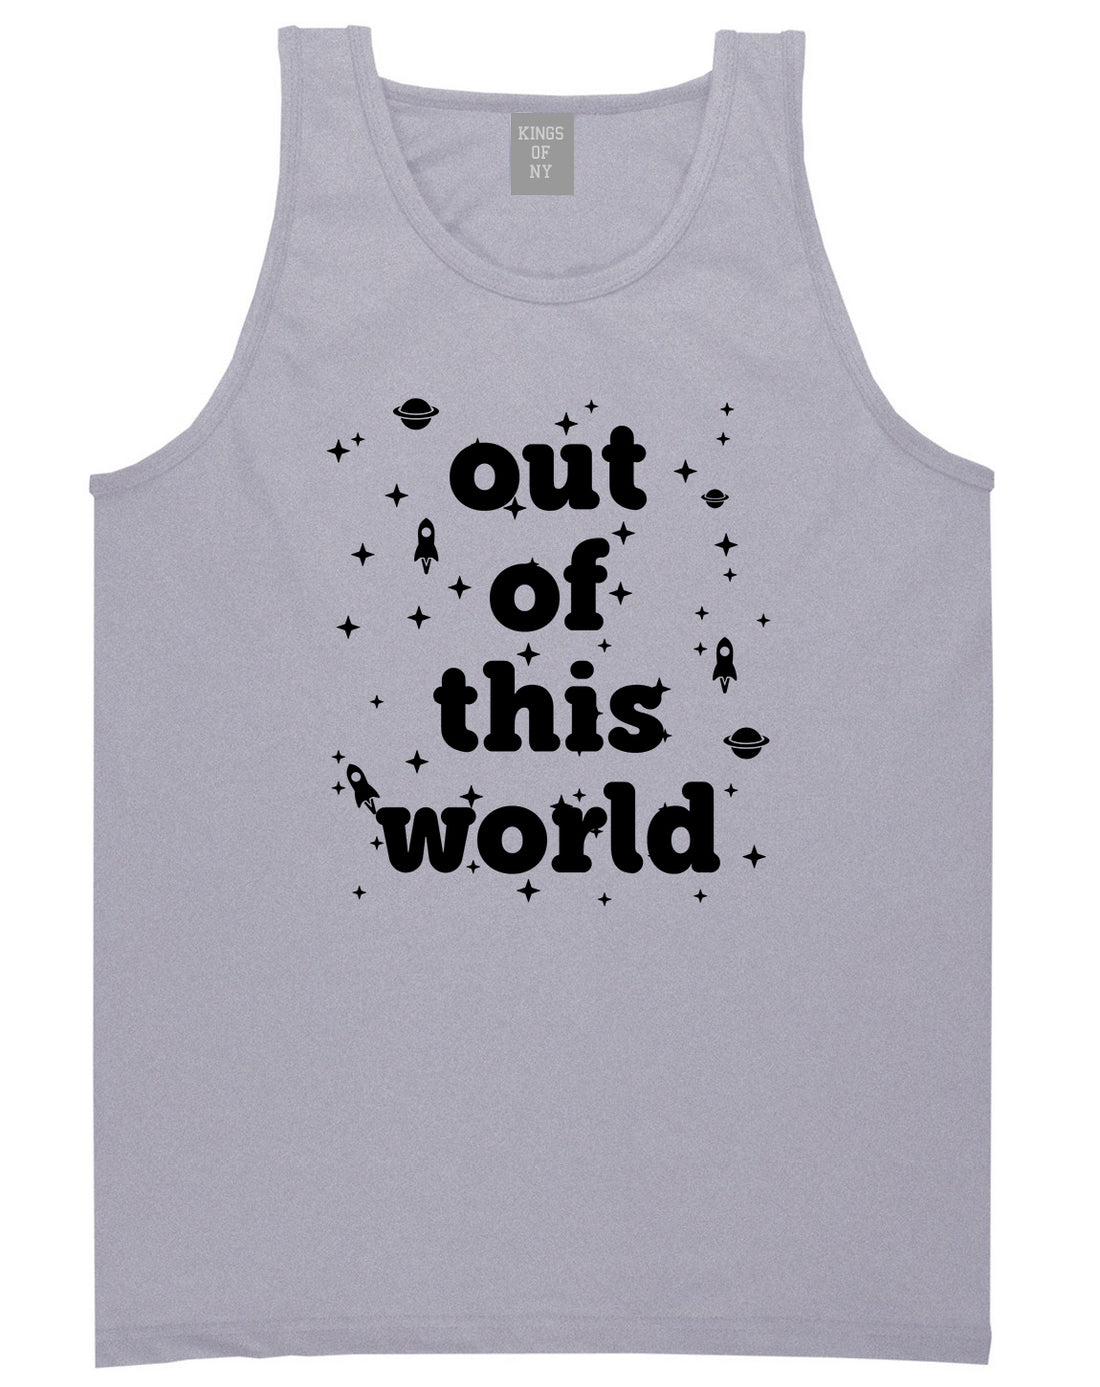 Out Of This World Space Galaxy Mens Tank Top Shirt Grey by Kings Of NY